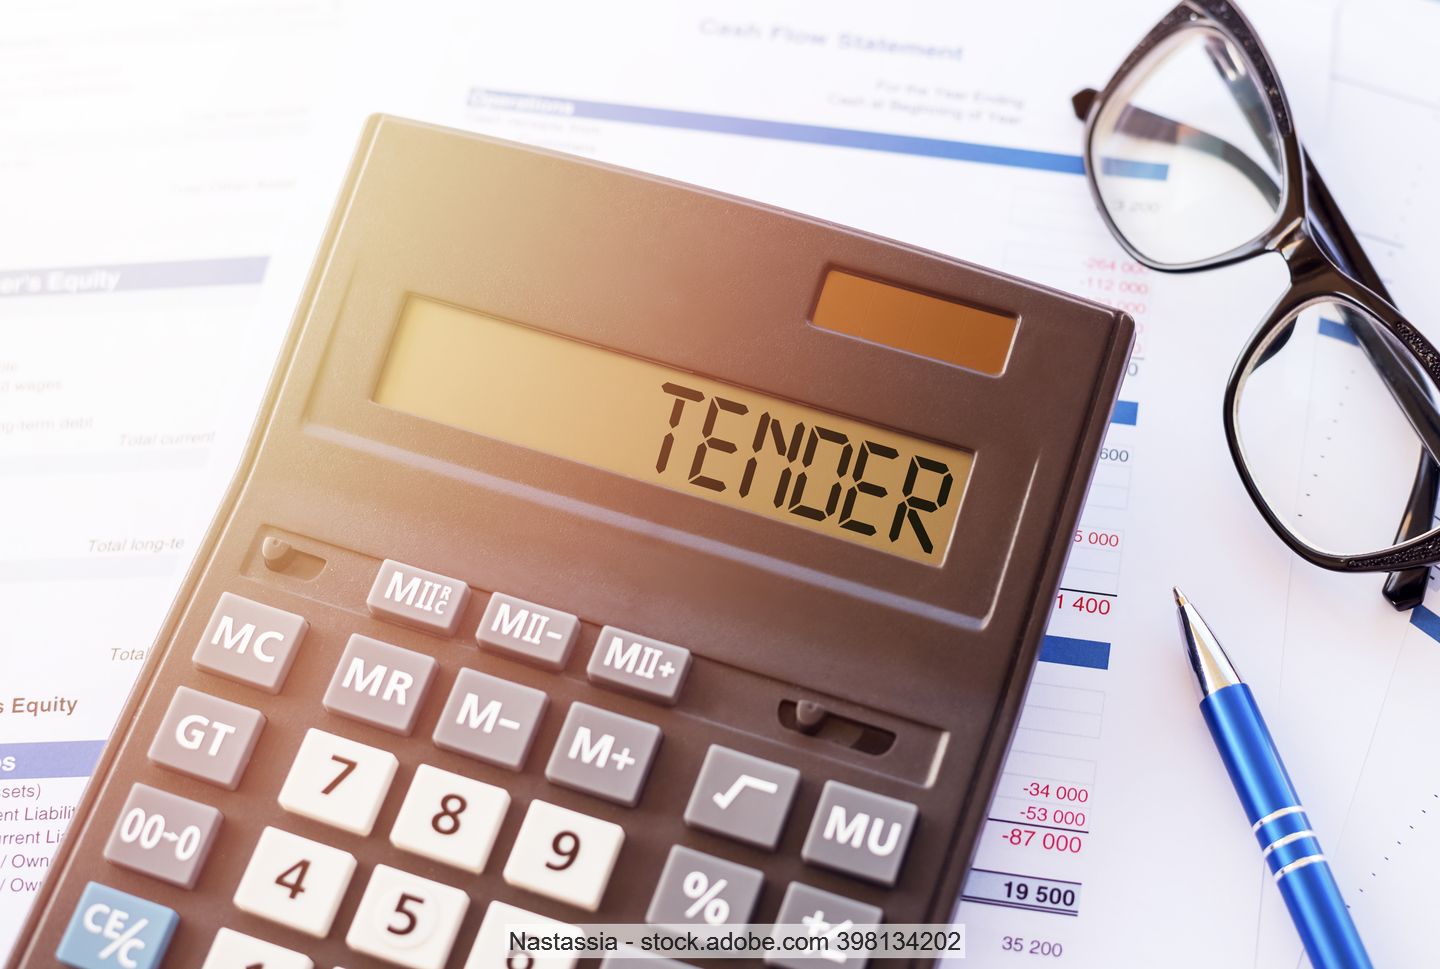 pocket calculator, glasses and paper lie on a desk. The word "ternder" appears in the display of the calculator.